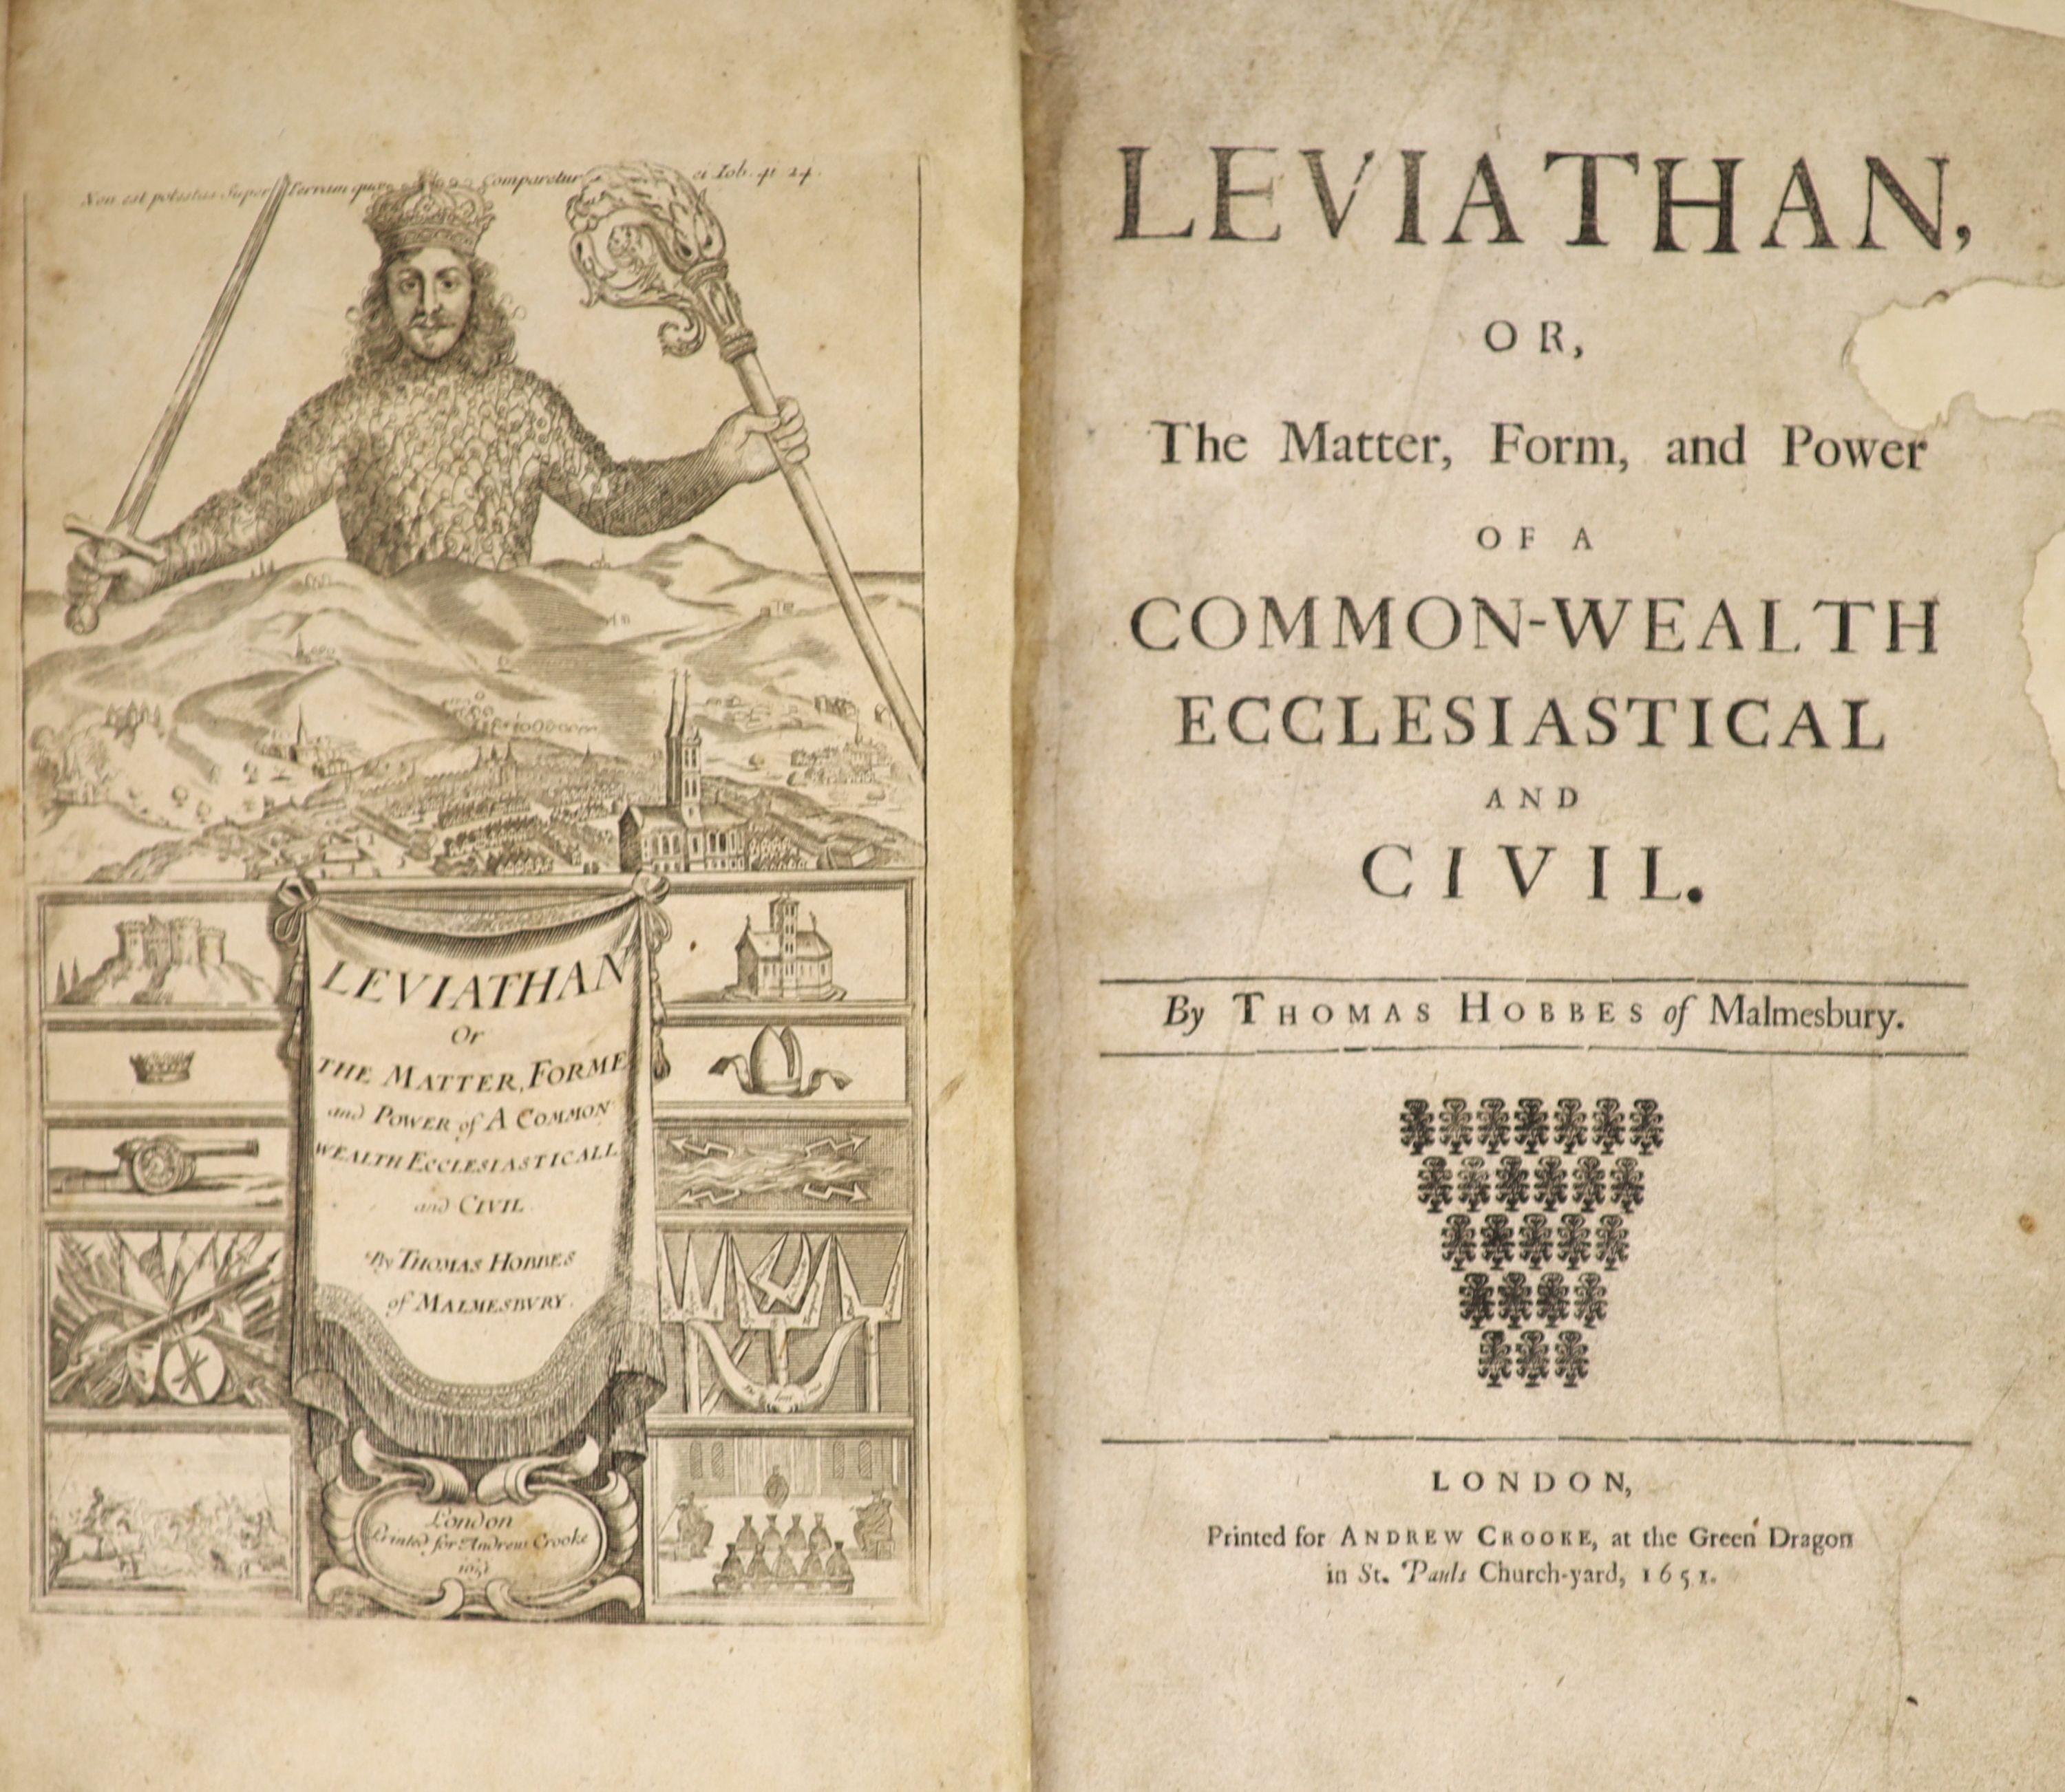 Hobbes, Thomas of Malmesbury - Leviathan, or The Matter, Form, and Power of A Commonwealth Ecclesiastical and Civil, 3rd edition (with upside triangle of 25 devices grouped in 5 rows on title), folio, contemporary calf,